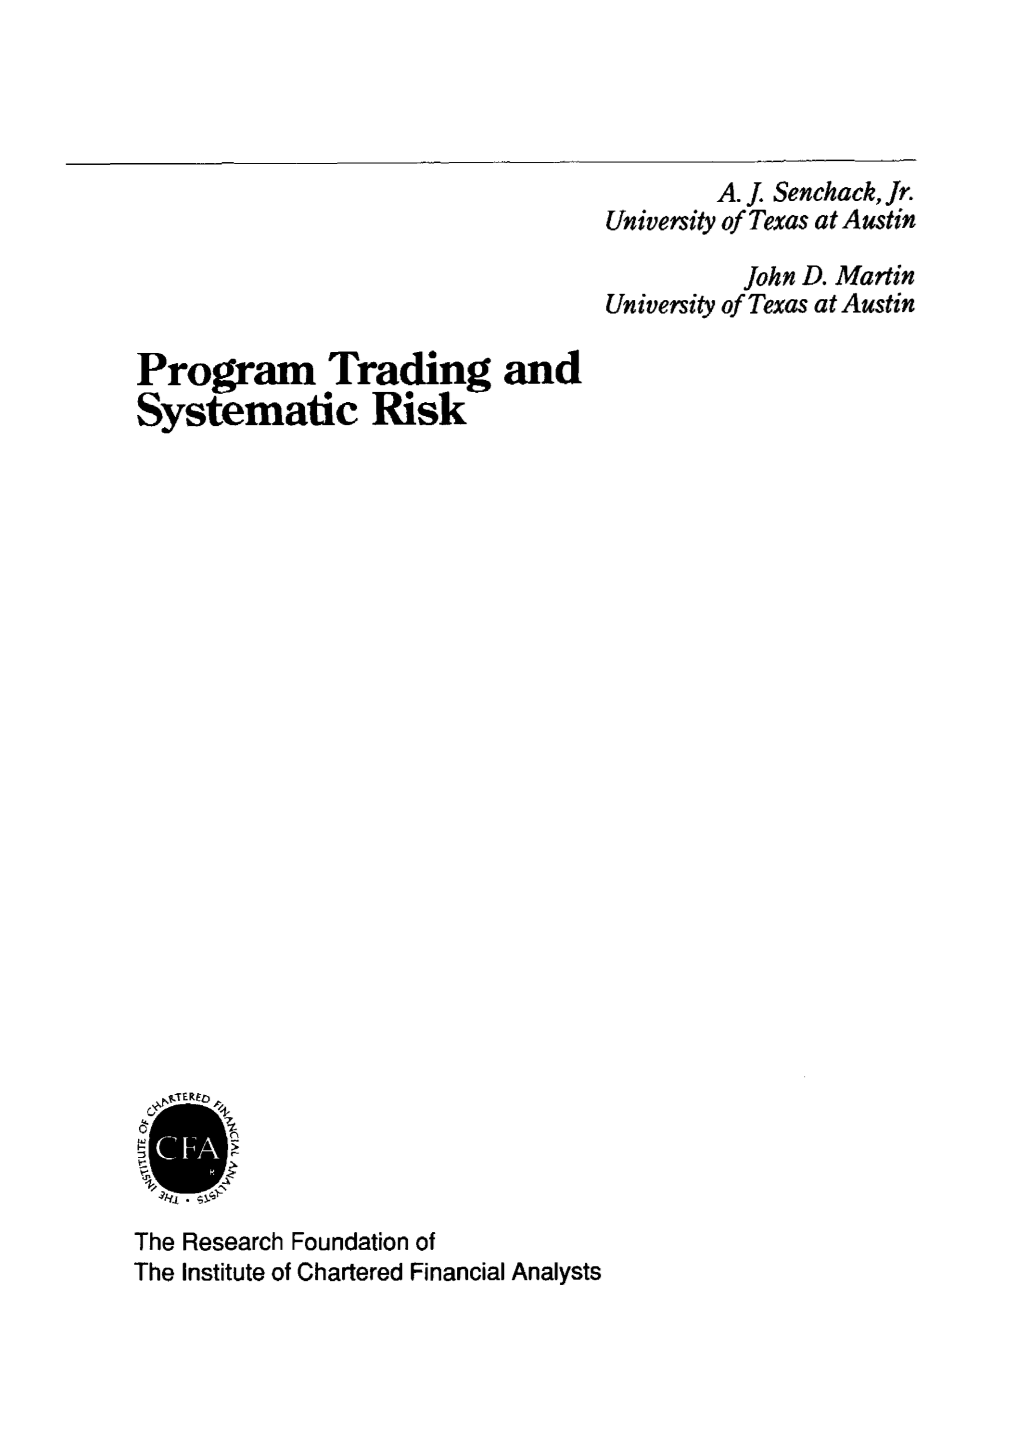 Program Trading and Systematic Risk